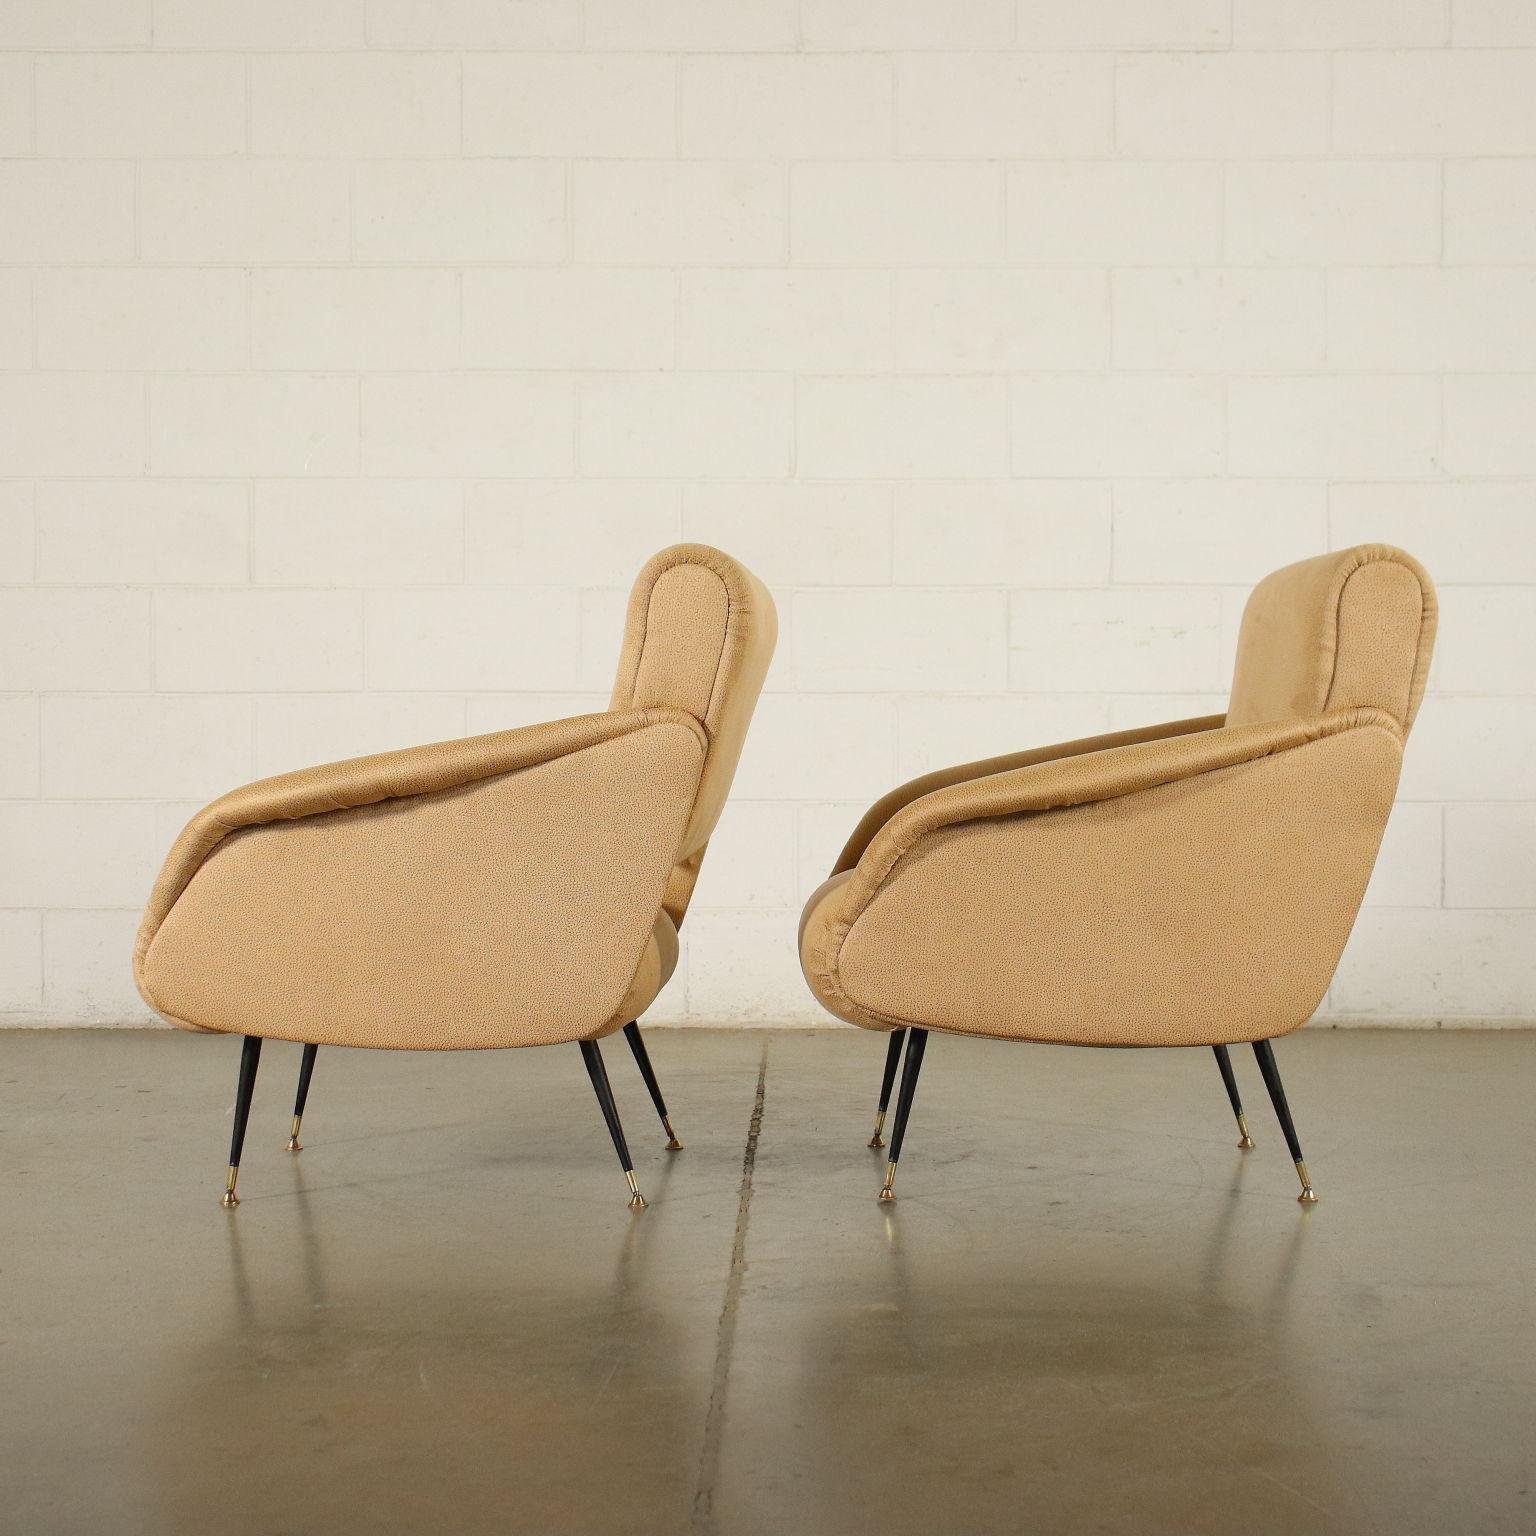 Pair of Armchairs Foam Leatherette, Italy, 1950s 1960s For Sale 3